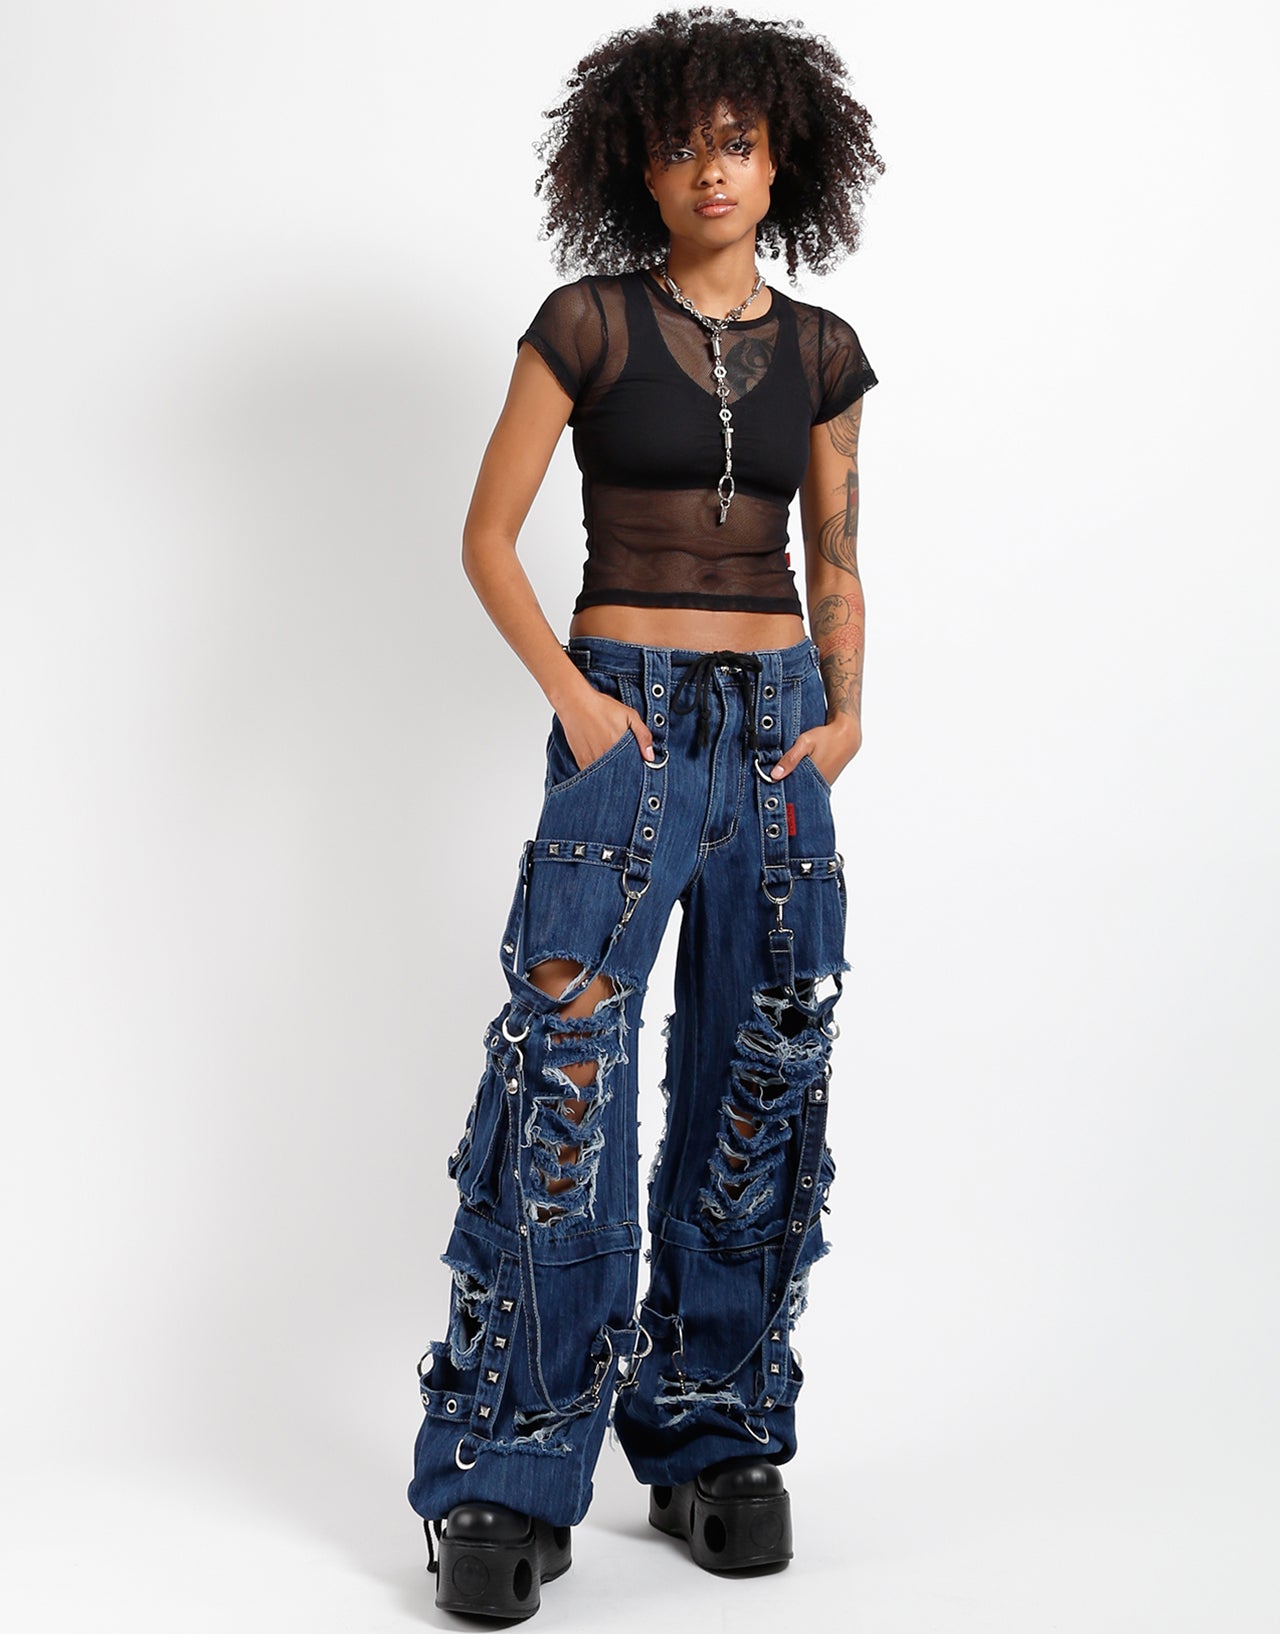 TRIPP NYC - FAUX LEATHER METALLIC EXTRA CROP TOP